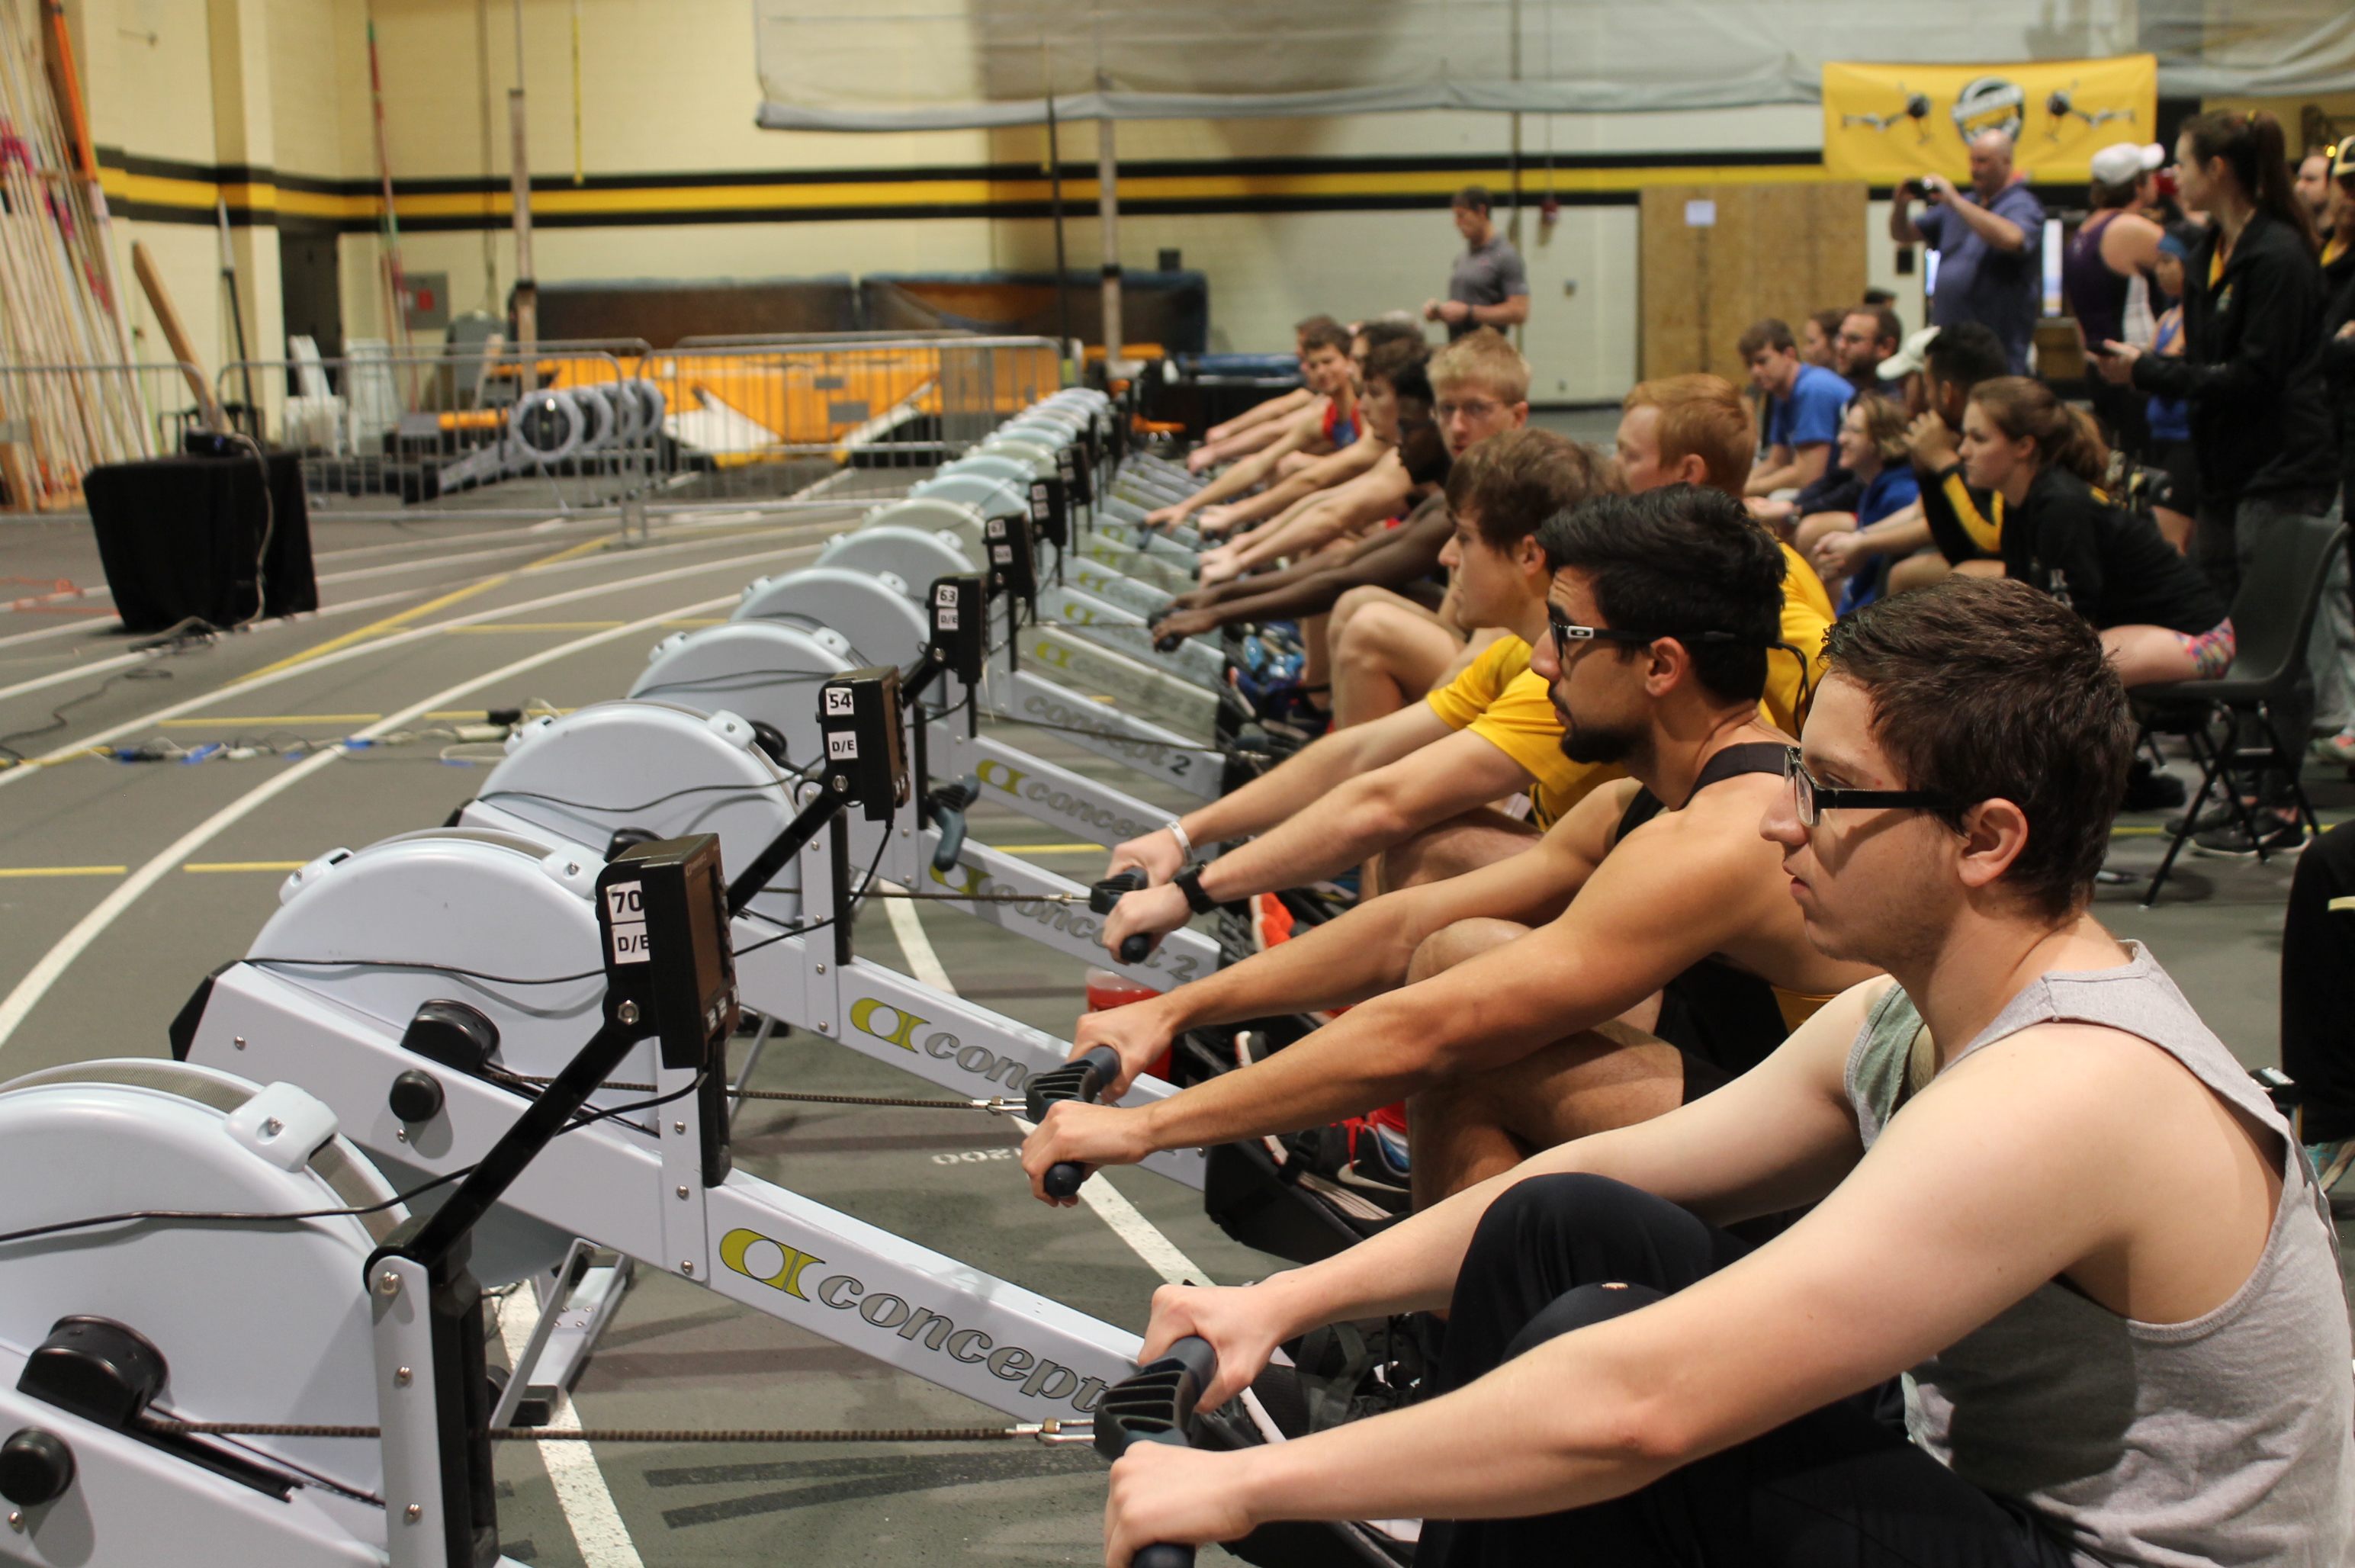 Looking down the row of ergometers at shocker sprints. its a men's event, and everyone is holding, waiting for the race to begin